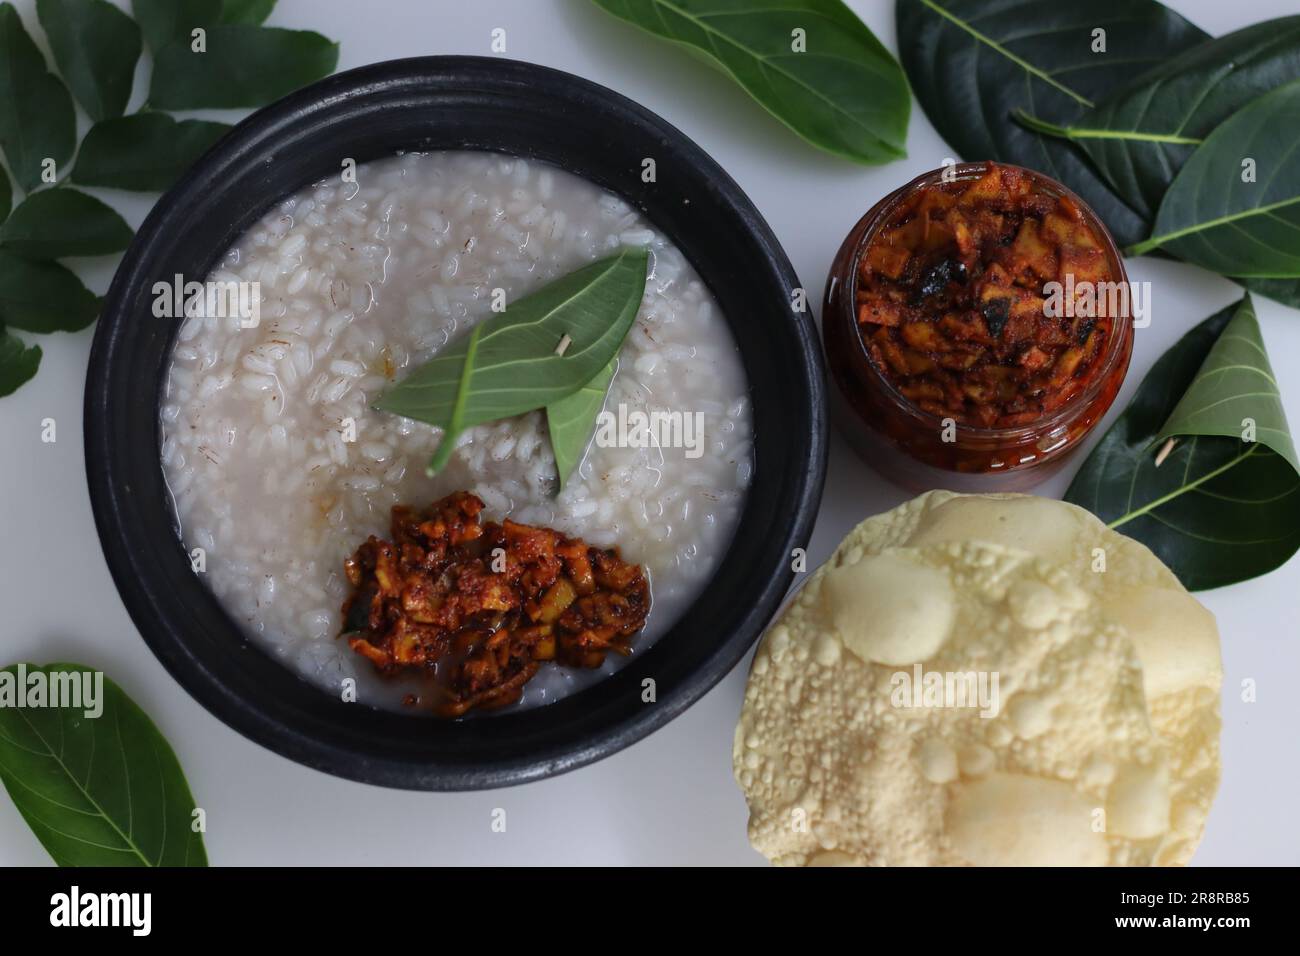 https://c8.alamy.com/comp/2R8RB85/kanji-and-kadumanga-rice-gruel-prepared-with-matta-rice-served-in-earthen-pot-in-a-traditional-way-with-spoon-made-of-jackpot-tree-leaf-shot-with-r-2R8RB85.jpg